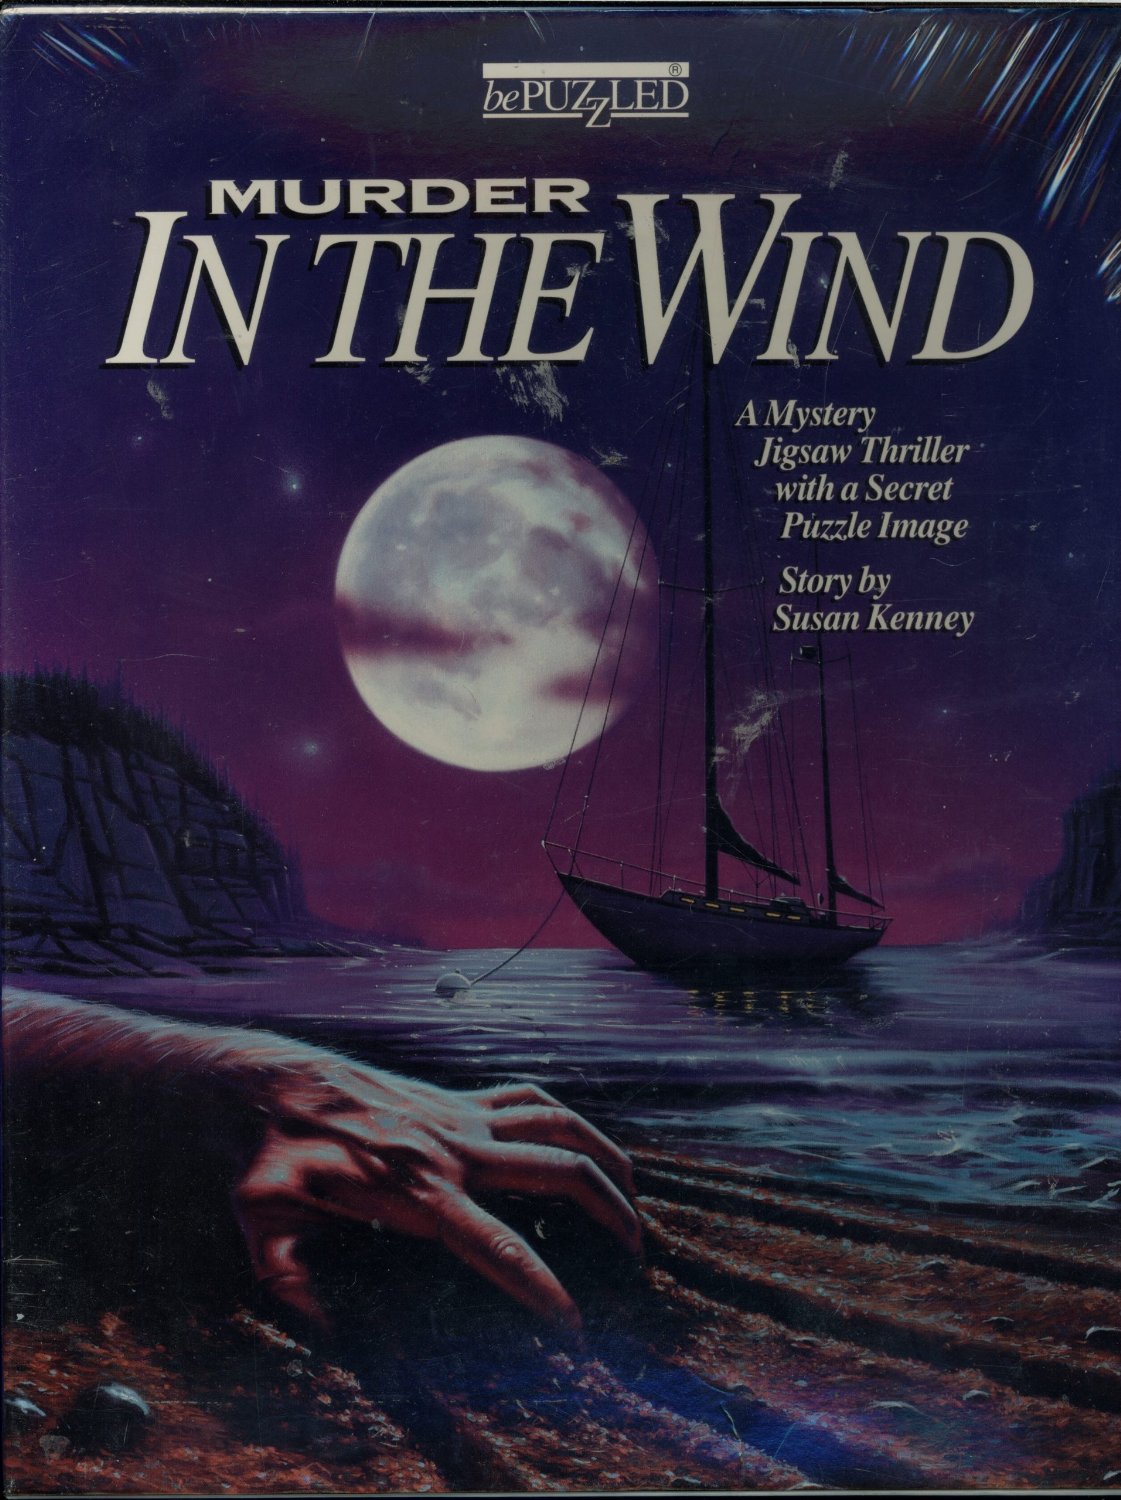 bePuzzled - Murder in the Wind - A Mystery Jigsaw Thriller with a